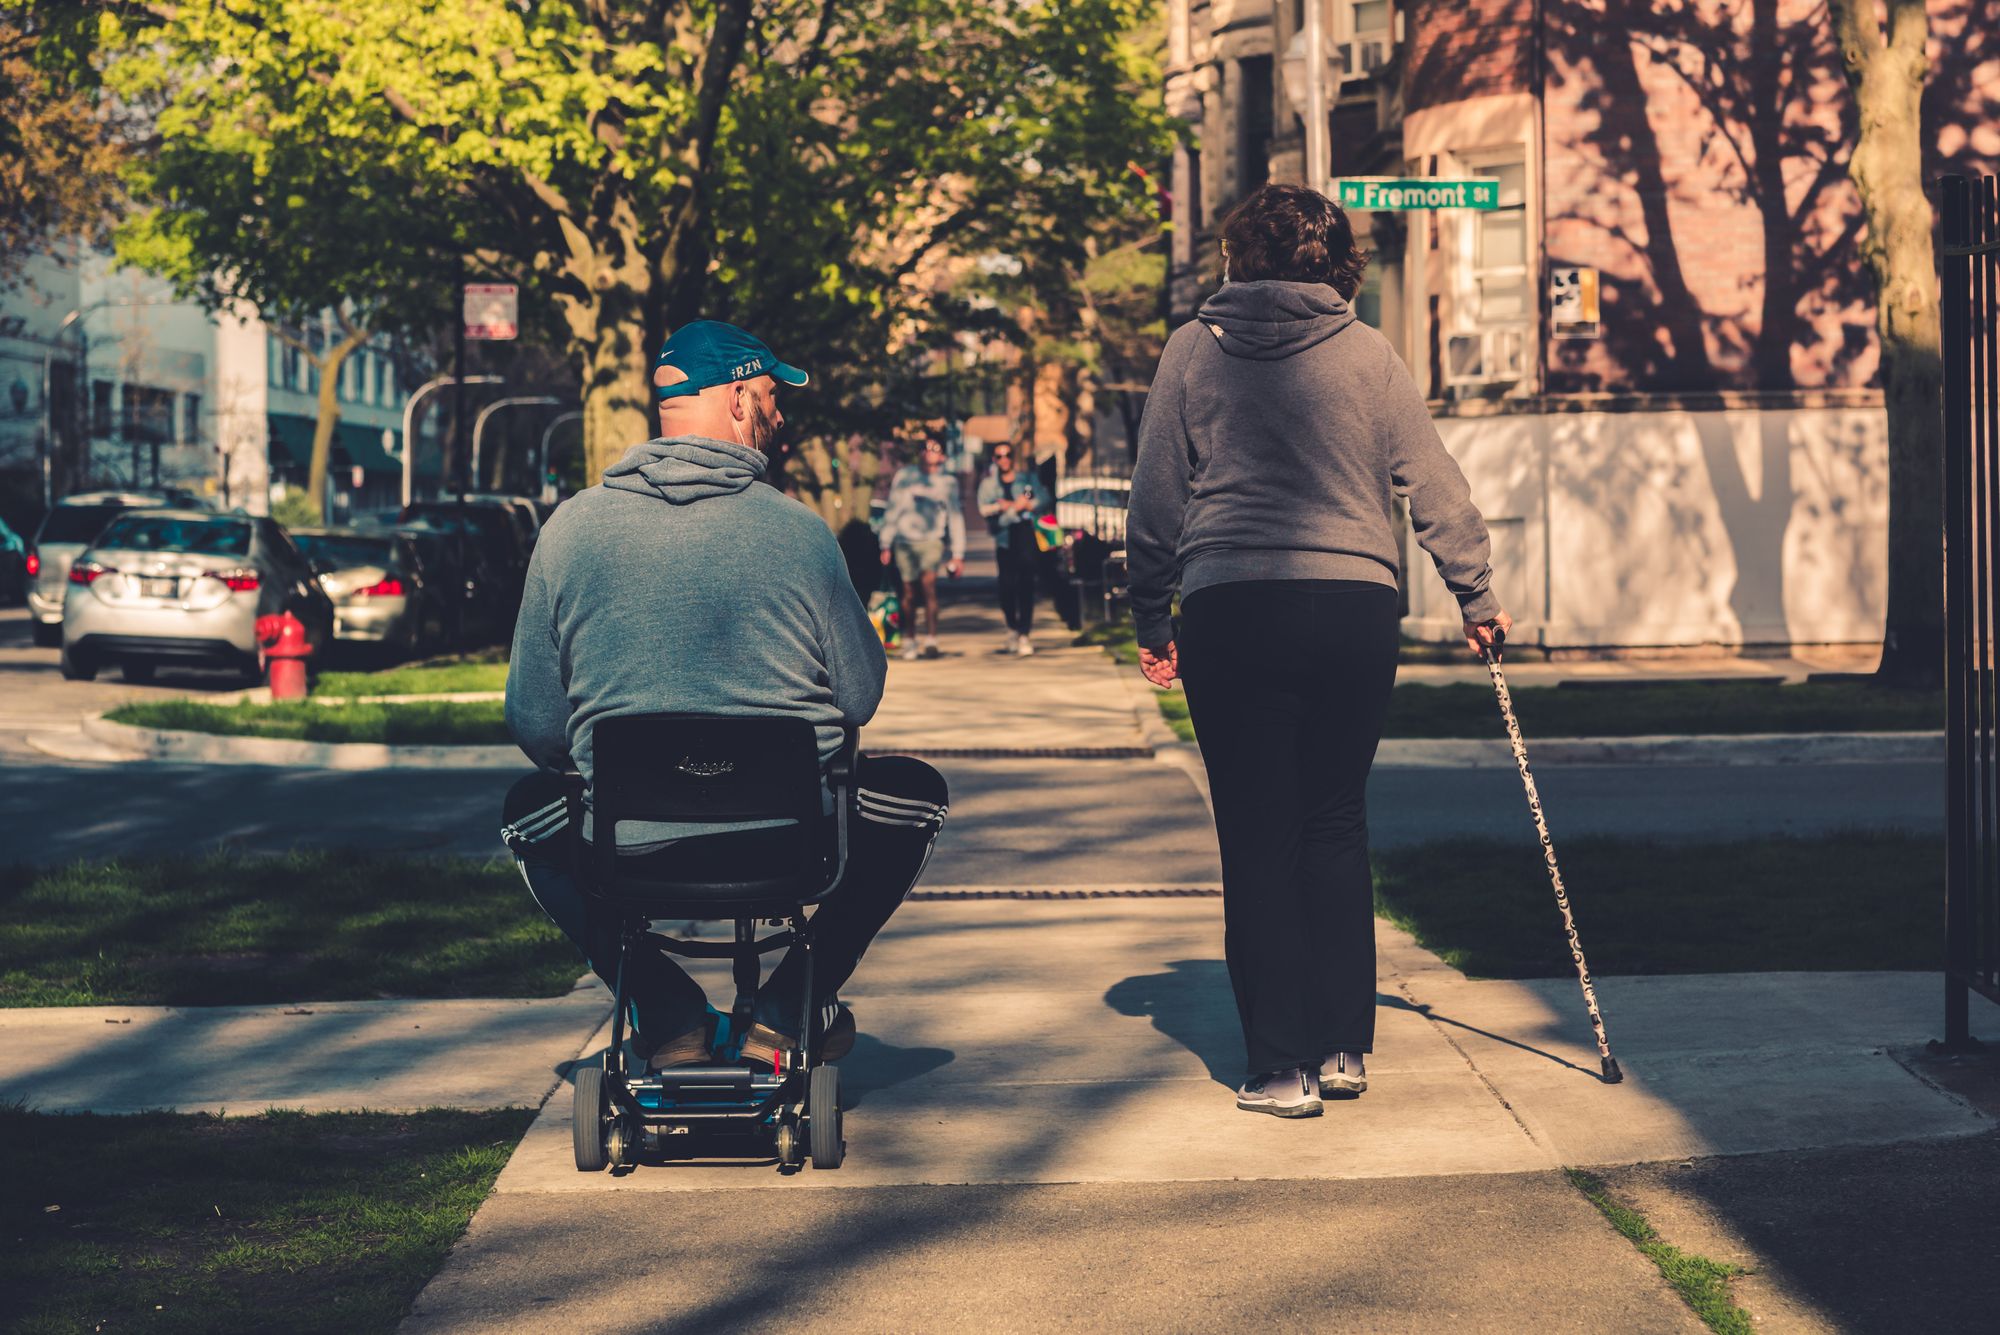 A man is riding in a wheelchair alongside a woman using a cane on a sidewalk. There are trees around, and parked cars. Two blurred figures are seen walking towards the camera.